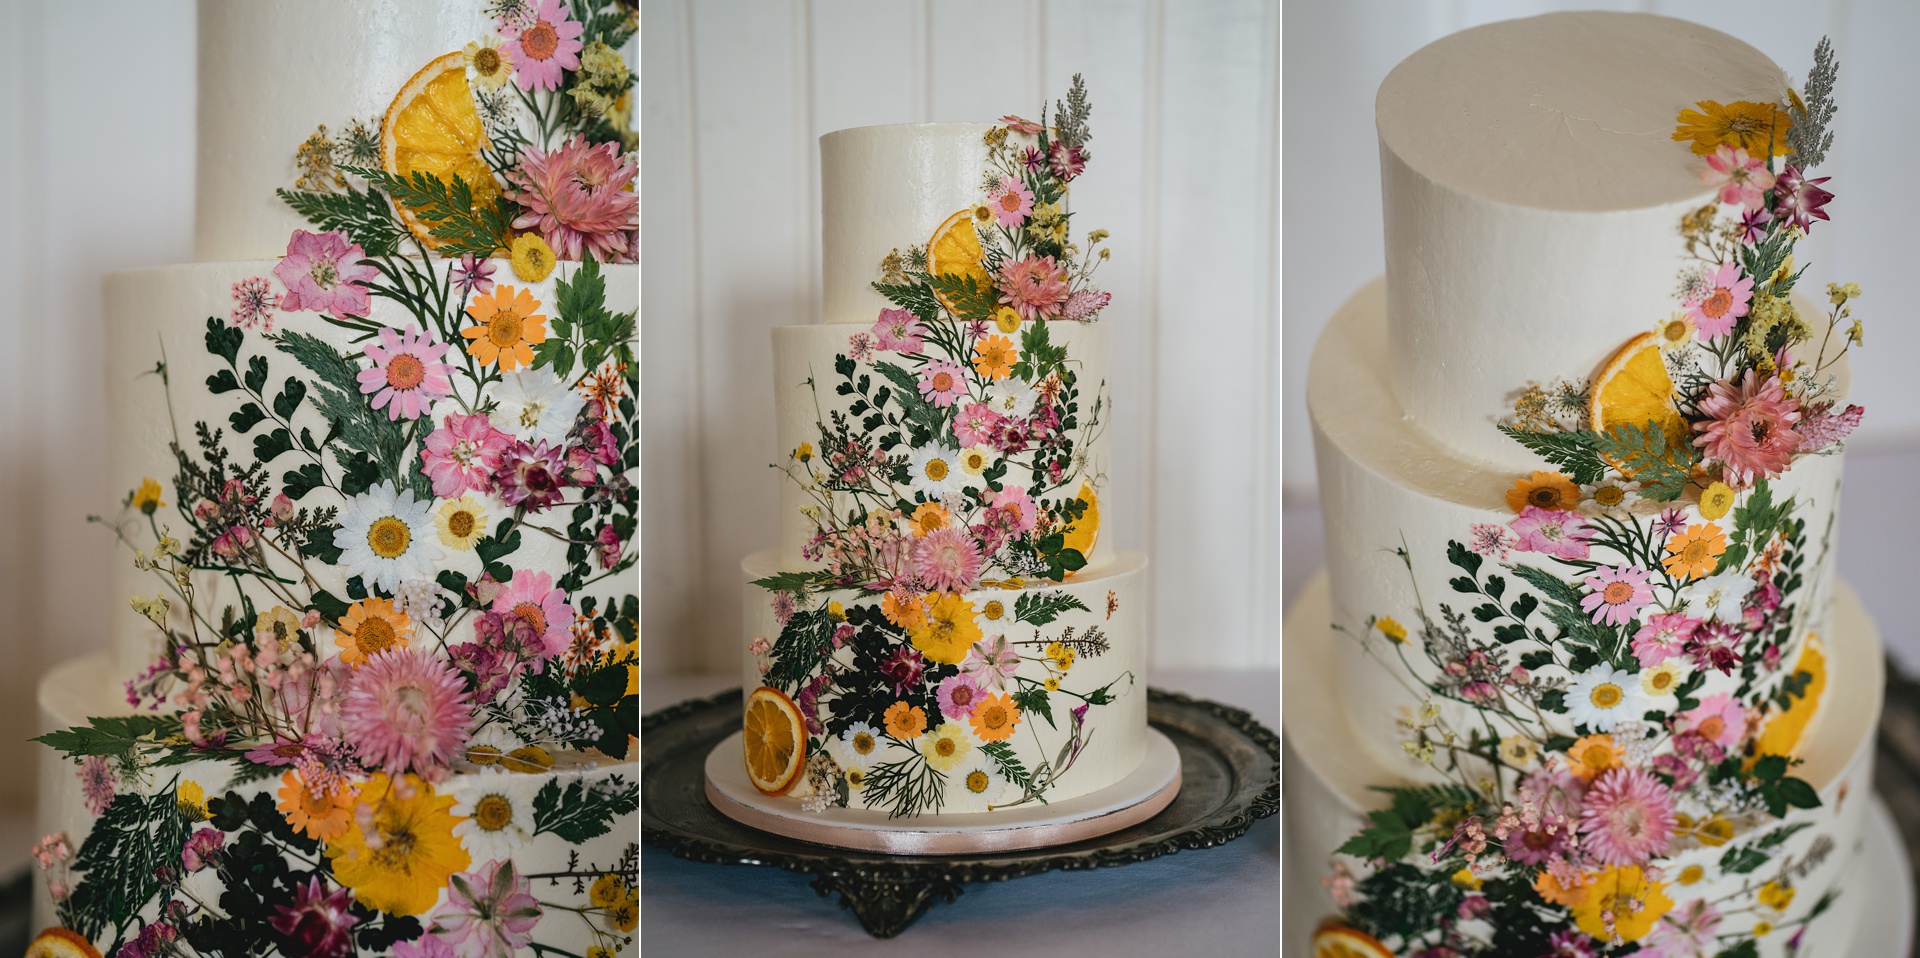 An incredible wedding cake decorated with edible flowers